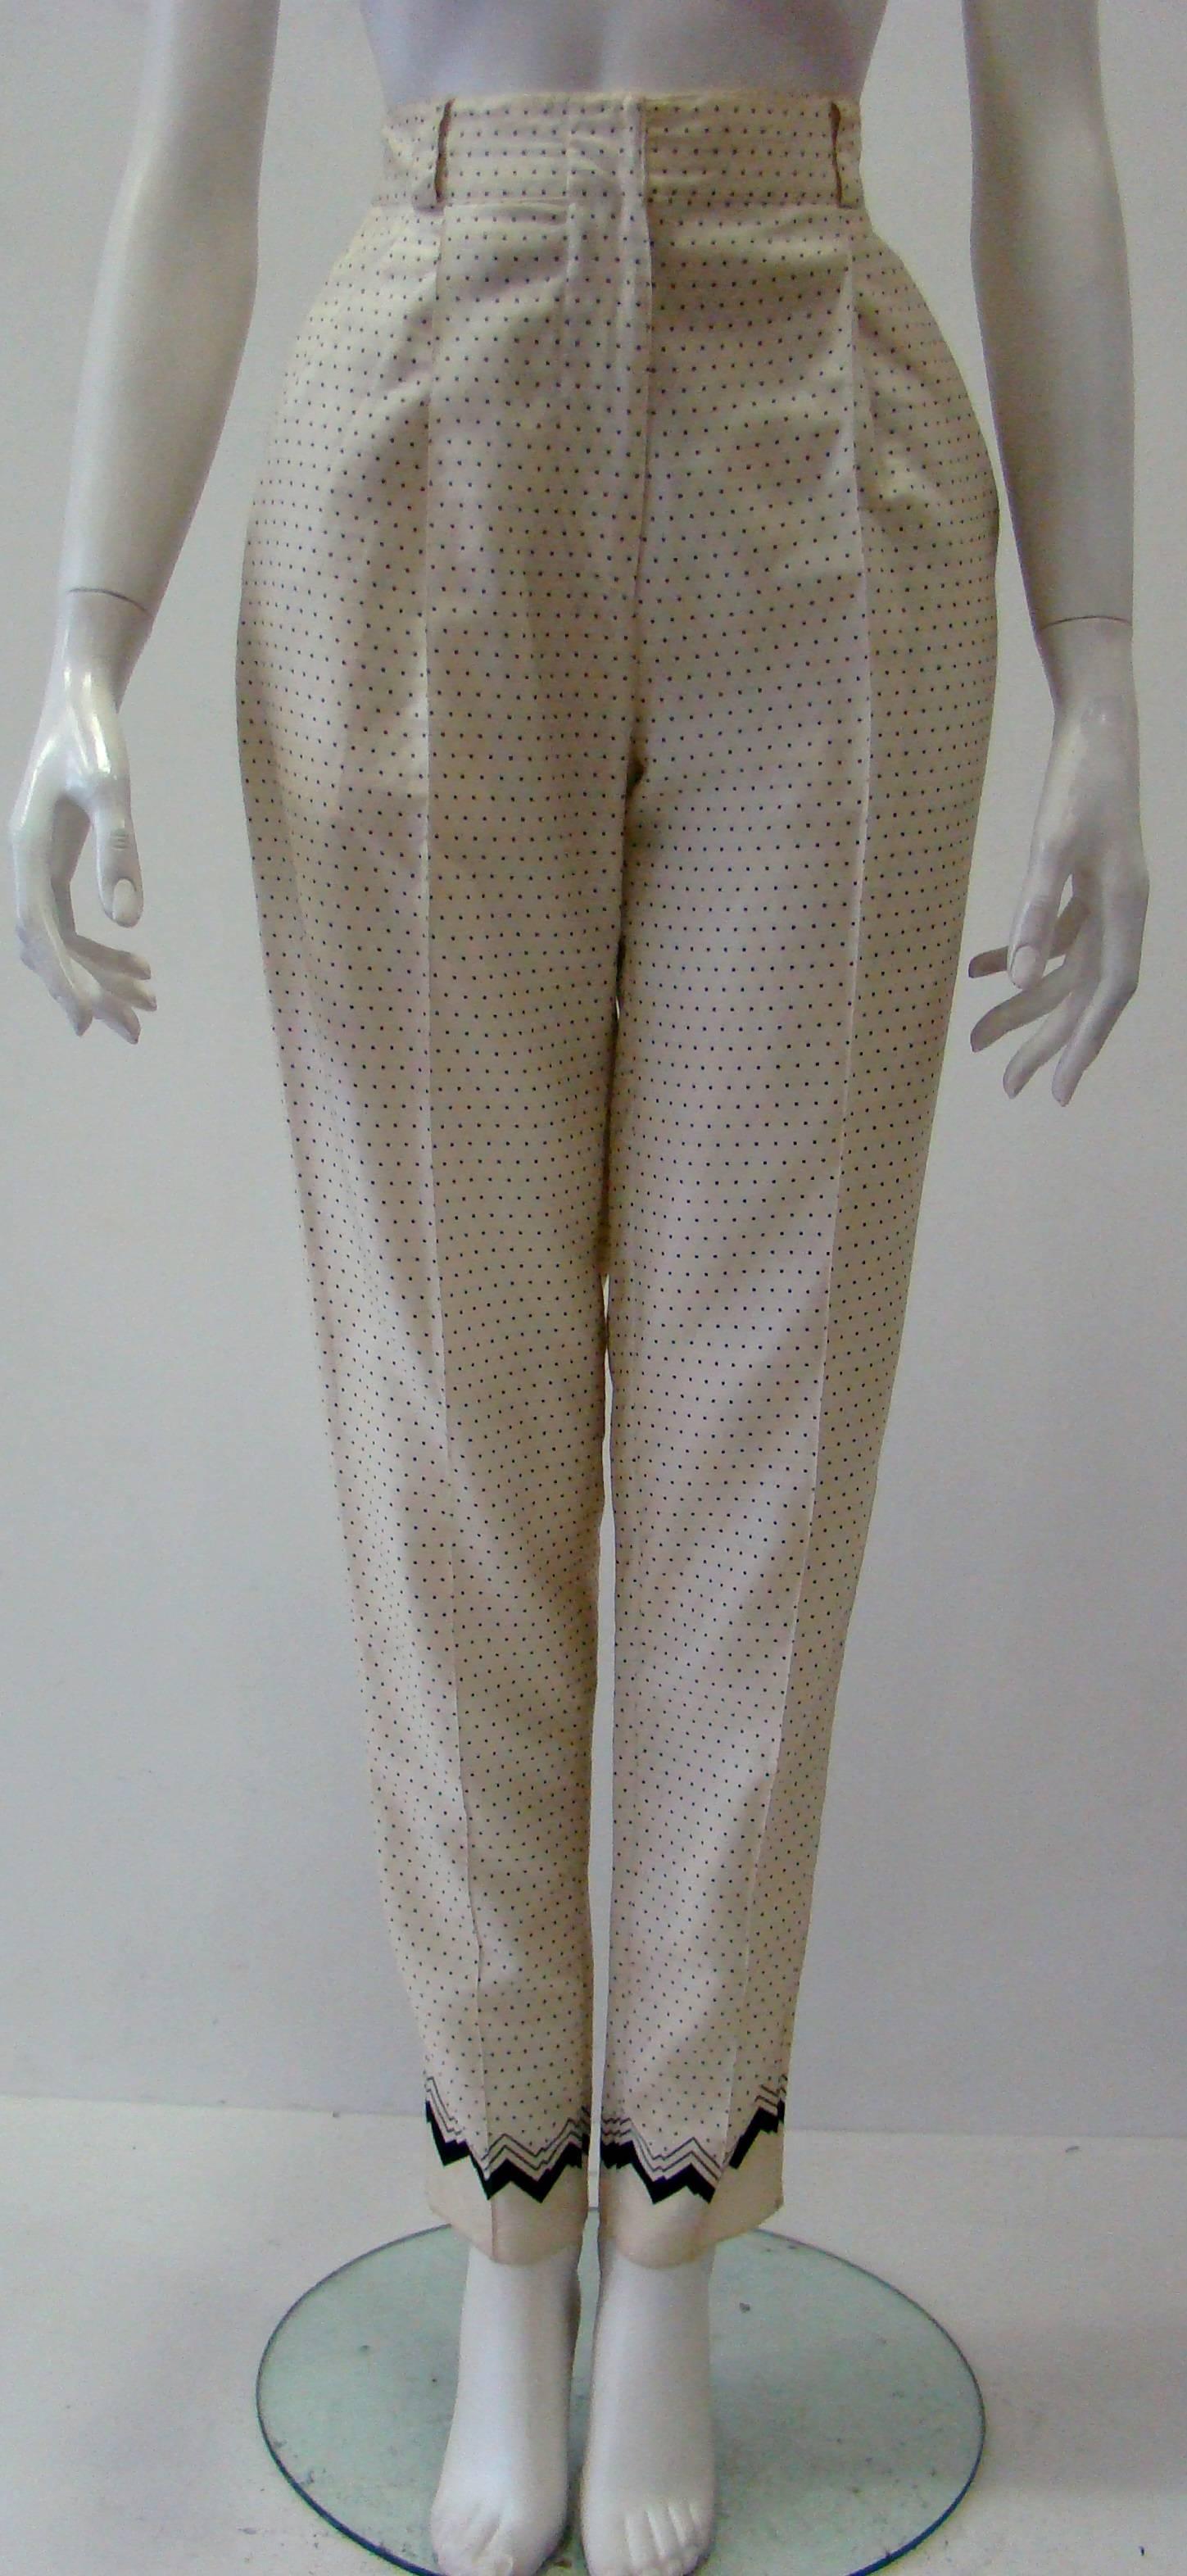 Gray Early Gianni Versace Polka Dot Cotton Pants Spring 1988 For Sale